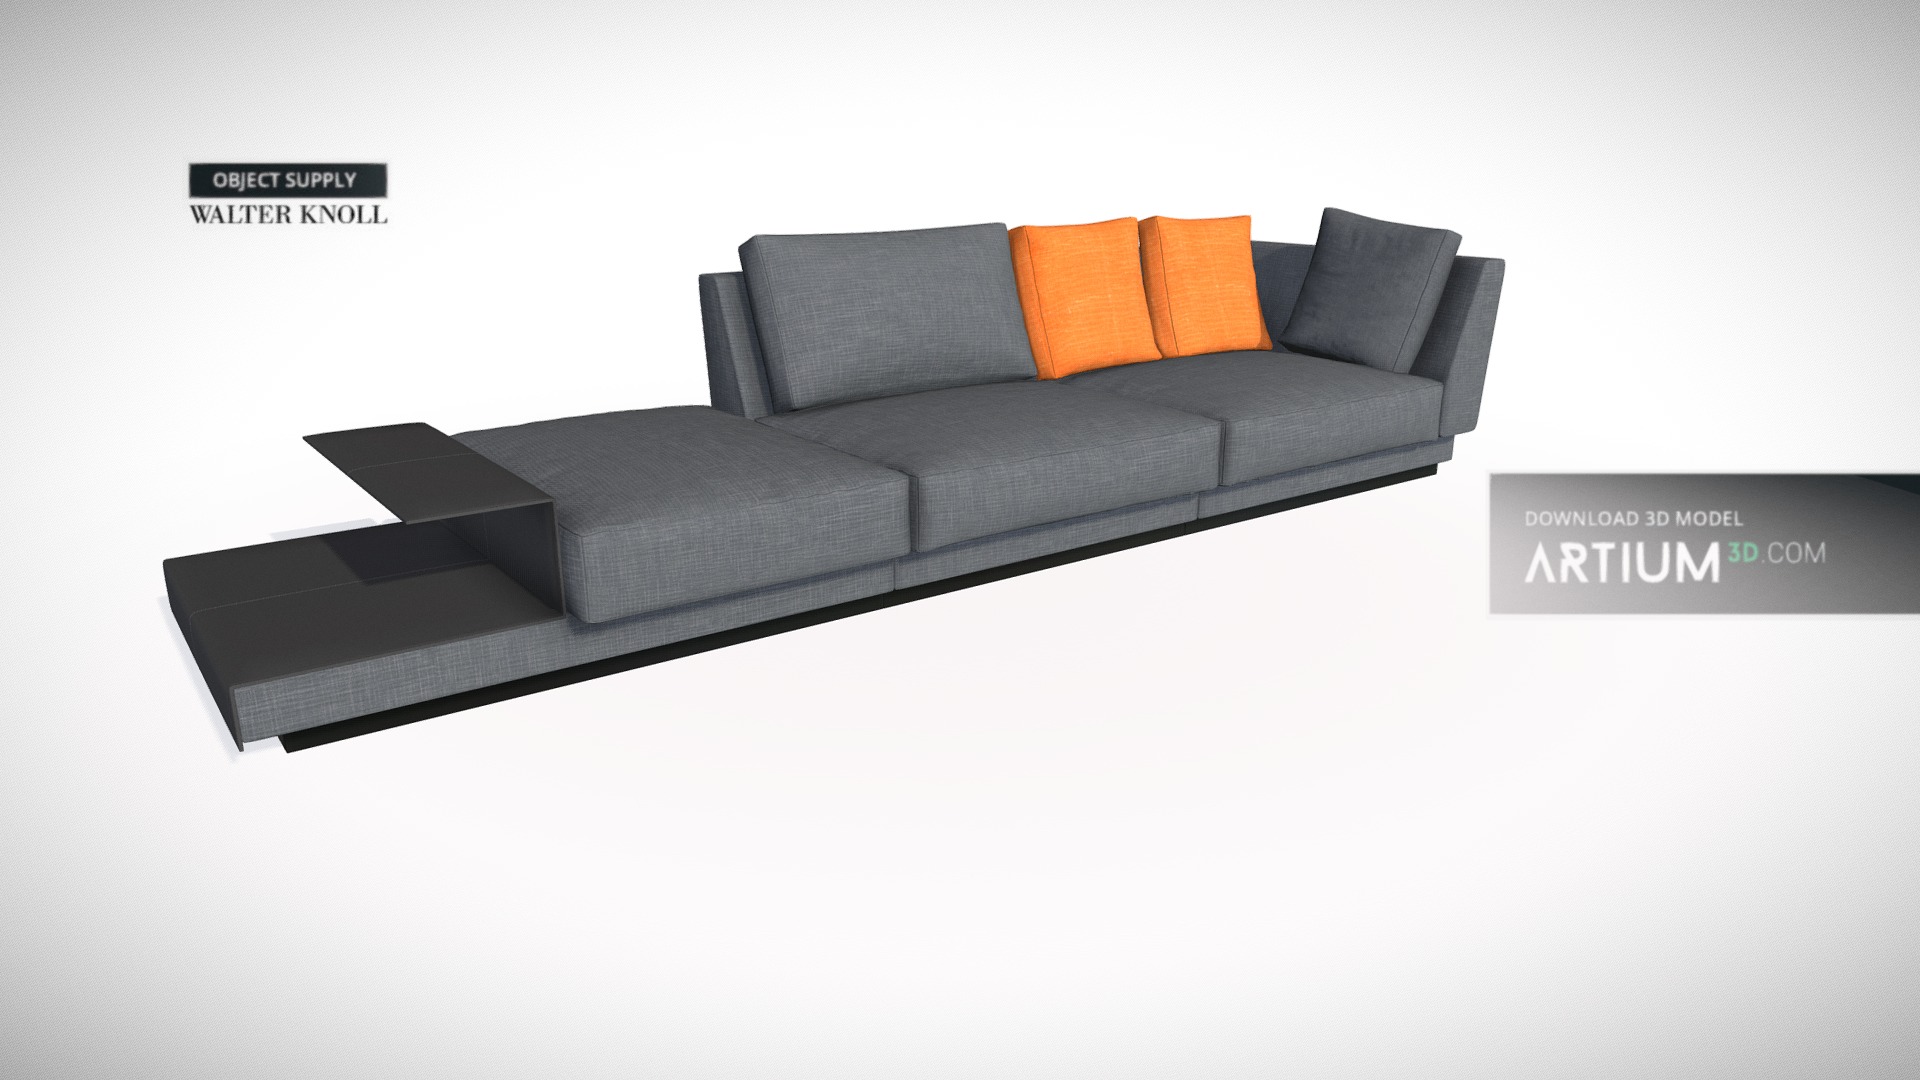 3D model Sofa Grand Suite – Walter Knoll – Design by EOOS - This is a 3D model of the Sofa Grand Suite - Walter Knoll - Design by EOOS. The 3D model is about a black couch with orange pillows.